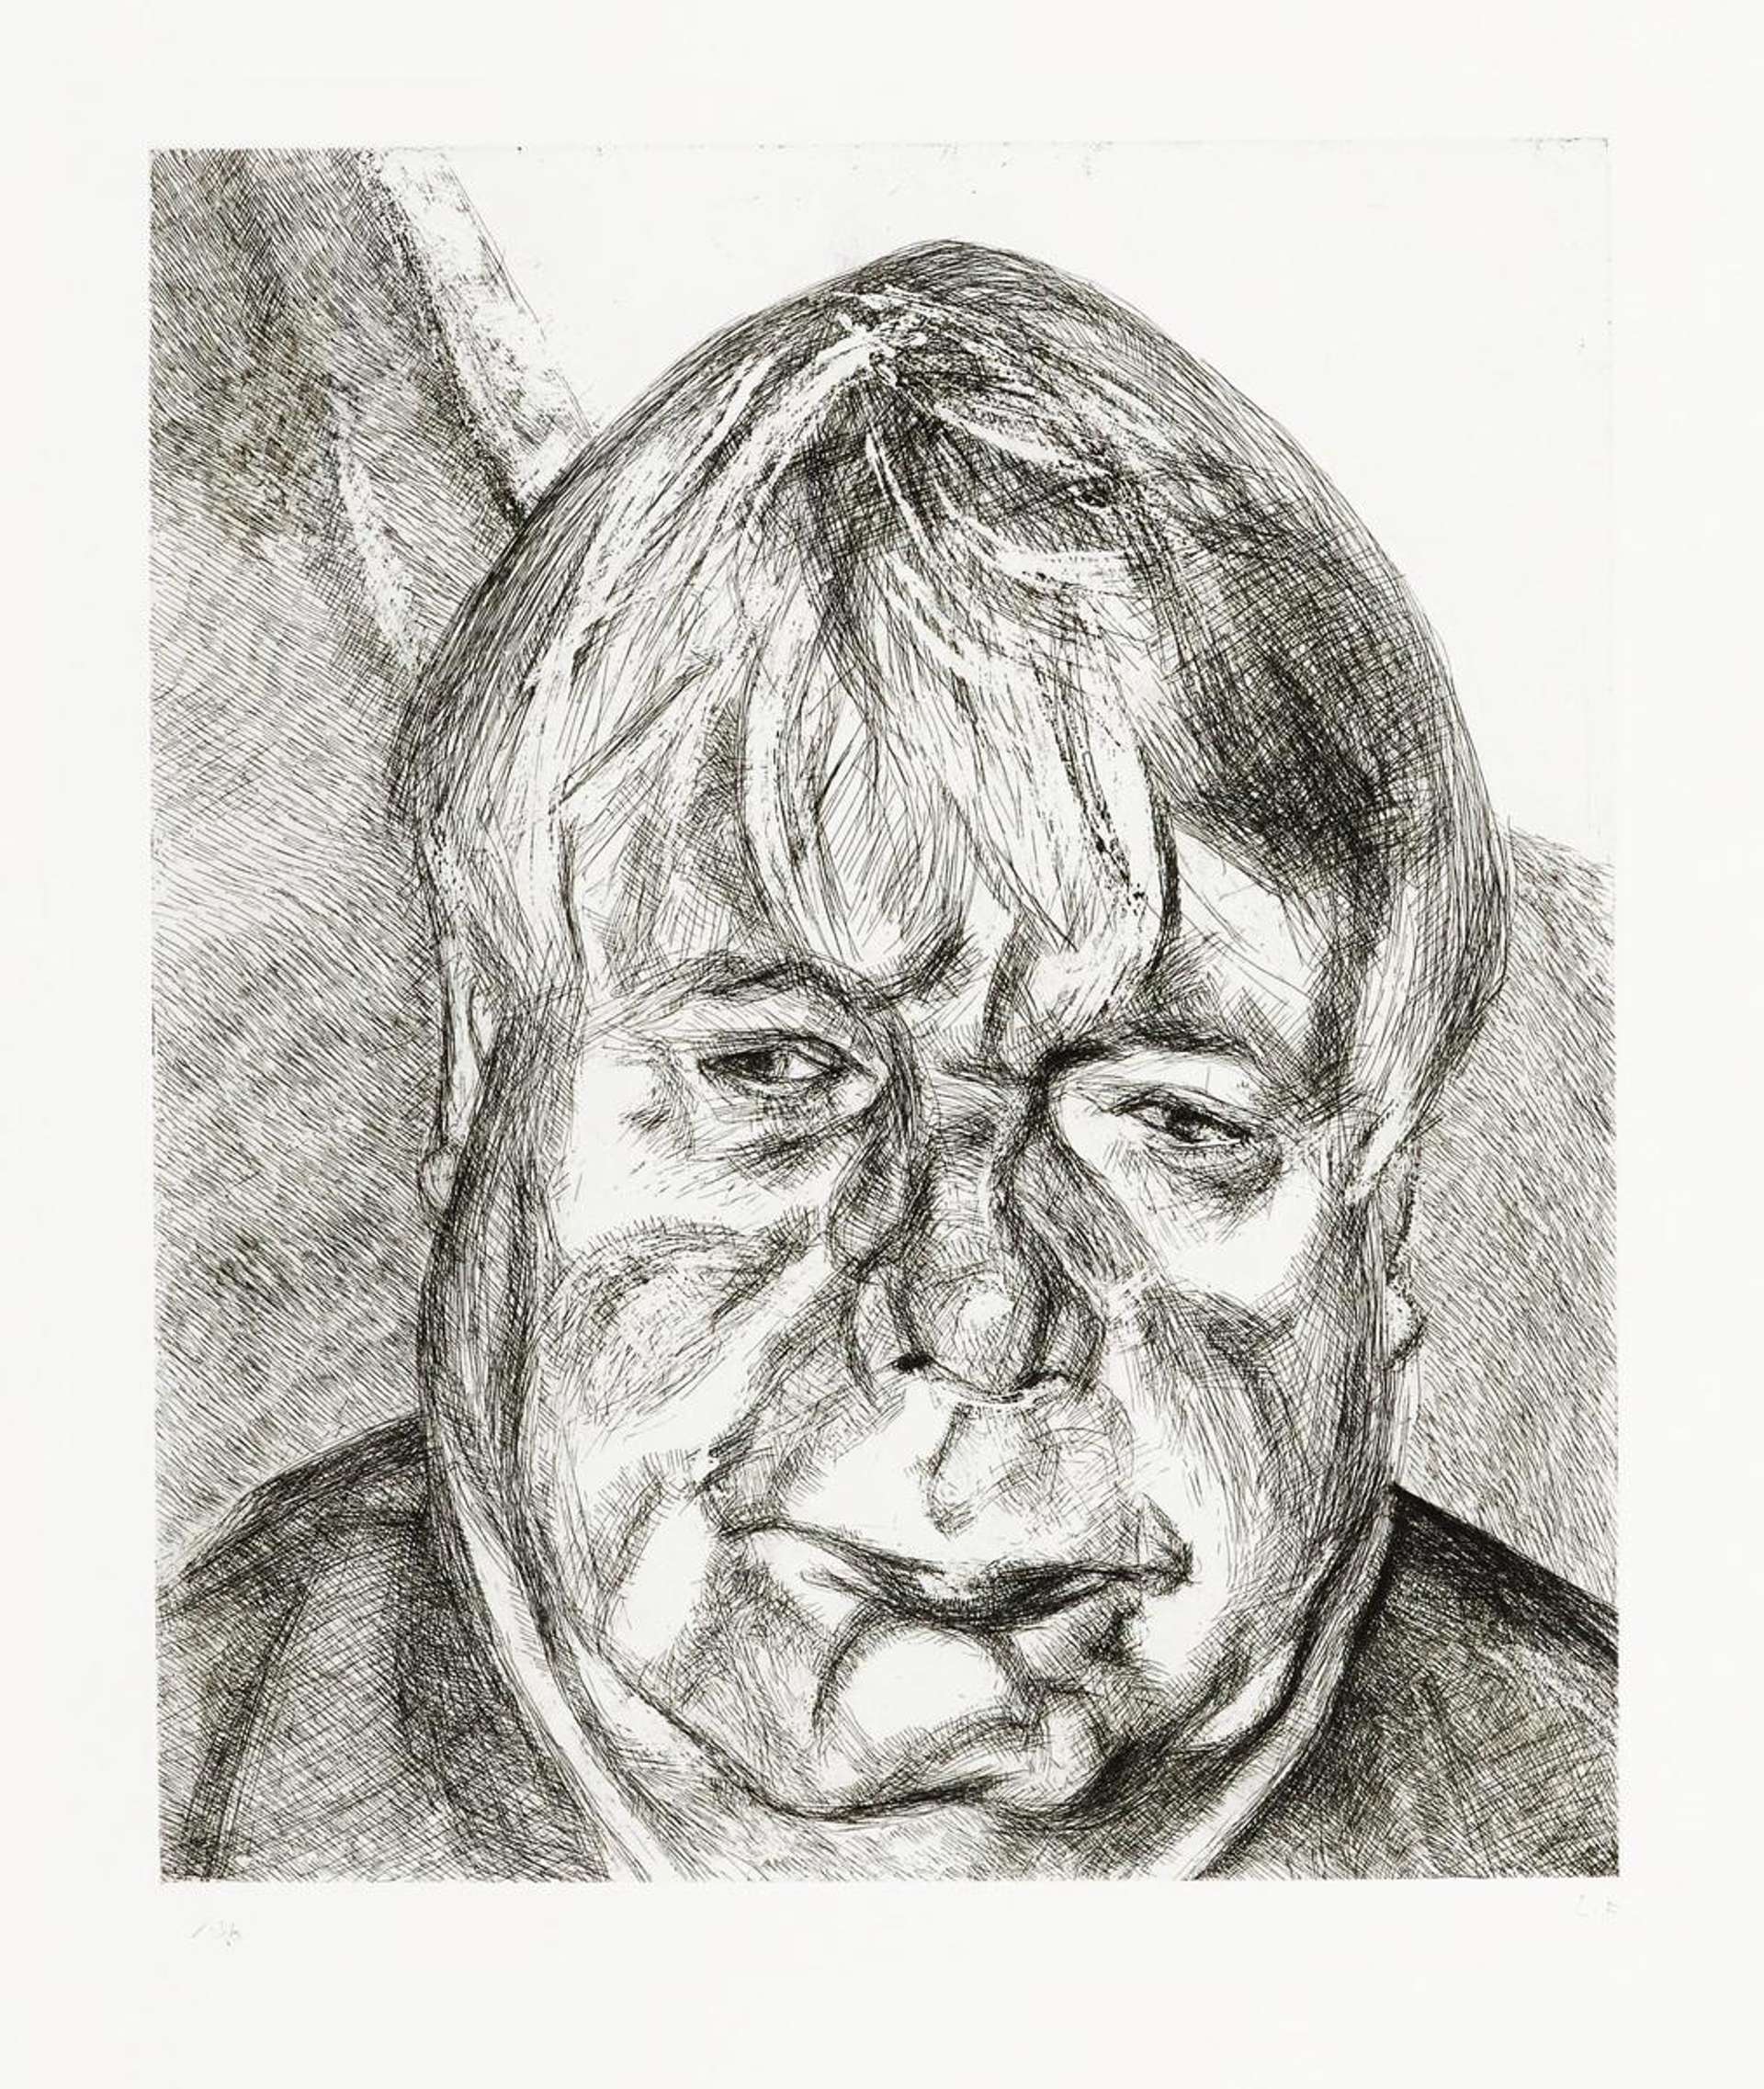 Lucian Freud: Donegal Man - Signed Print